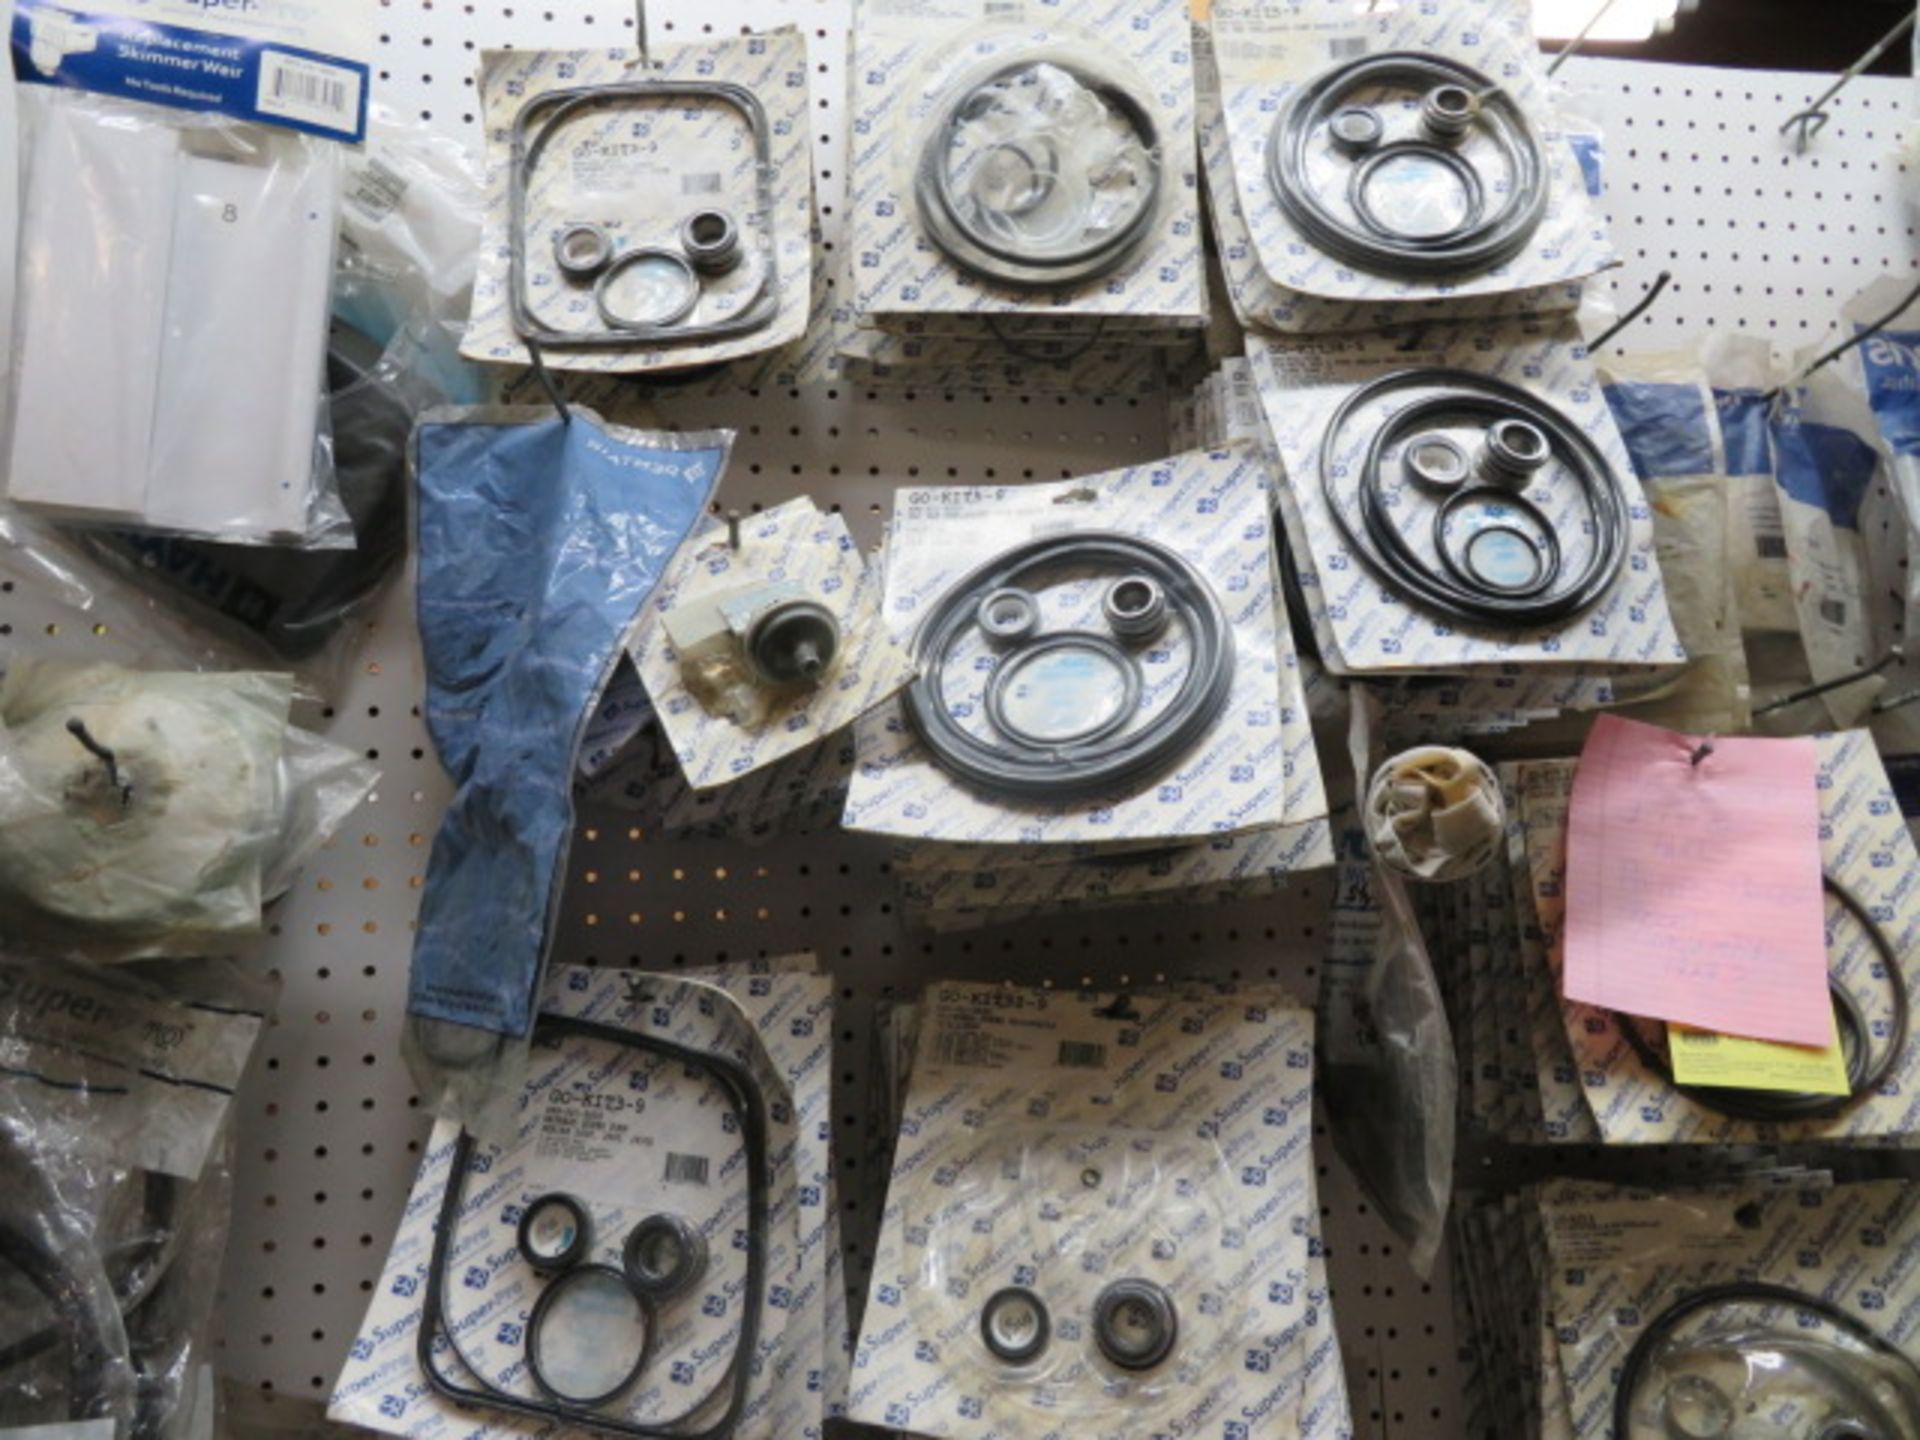 LOT CONSISTING OF: pool sweep, filter parts, pump parts, table chlorinator parts, assorted - Image 12 of 17